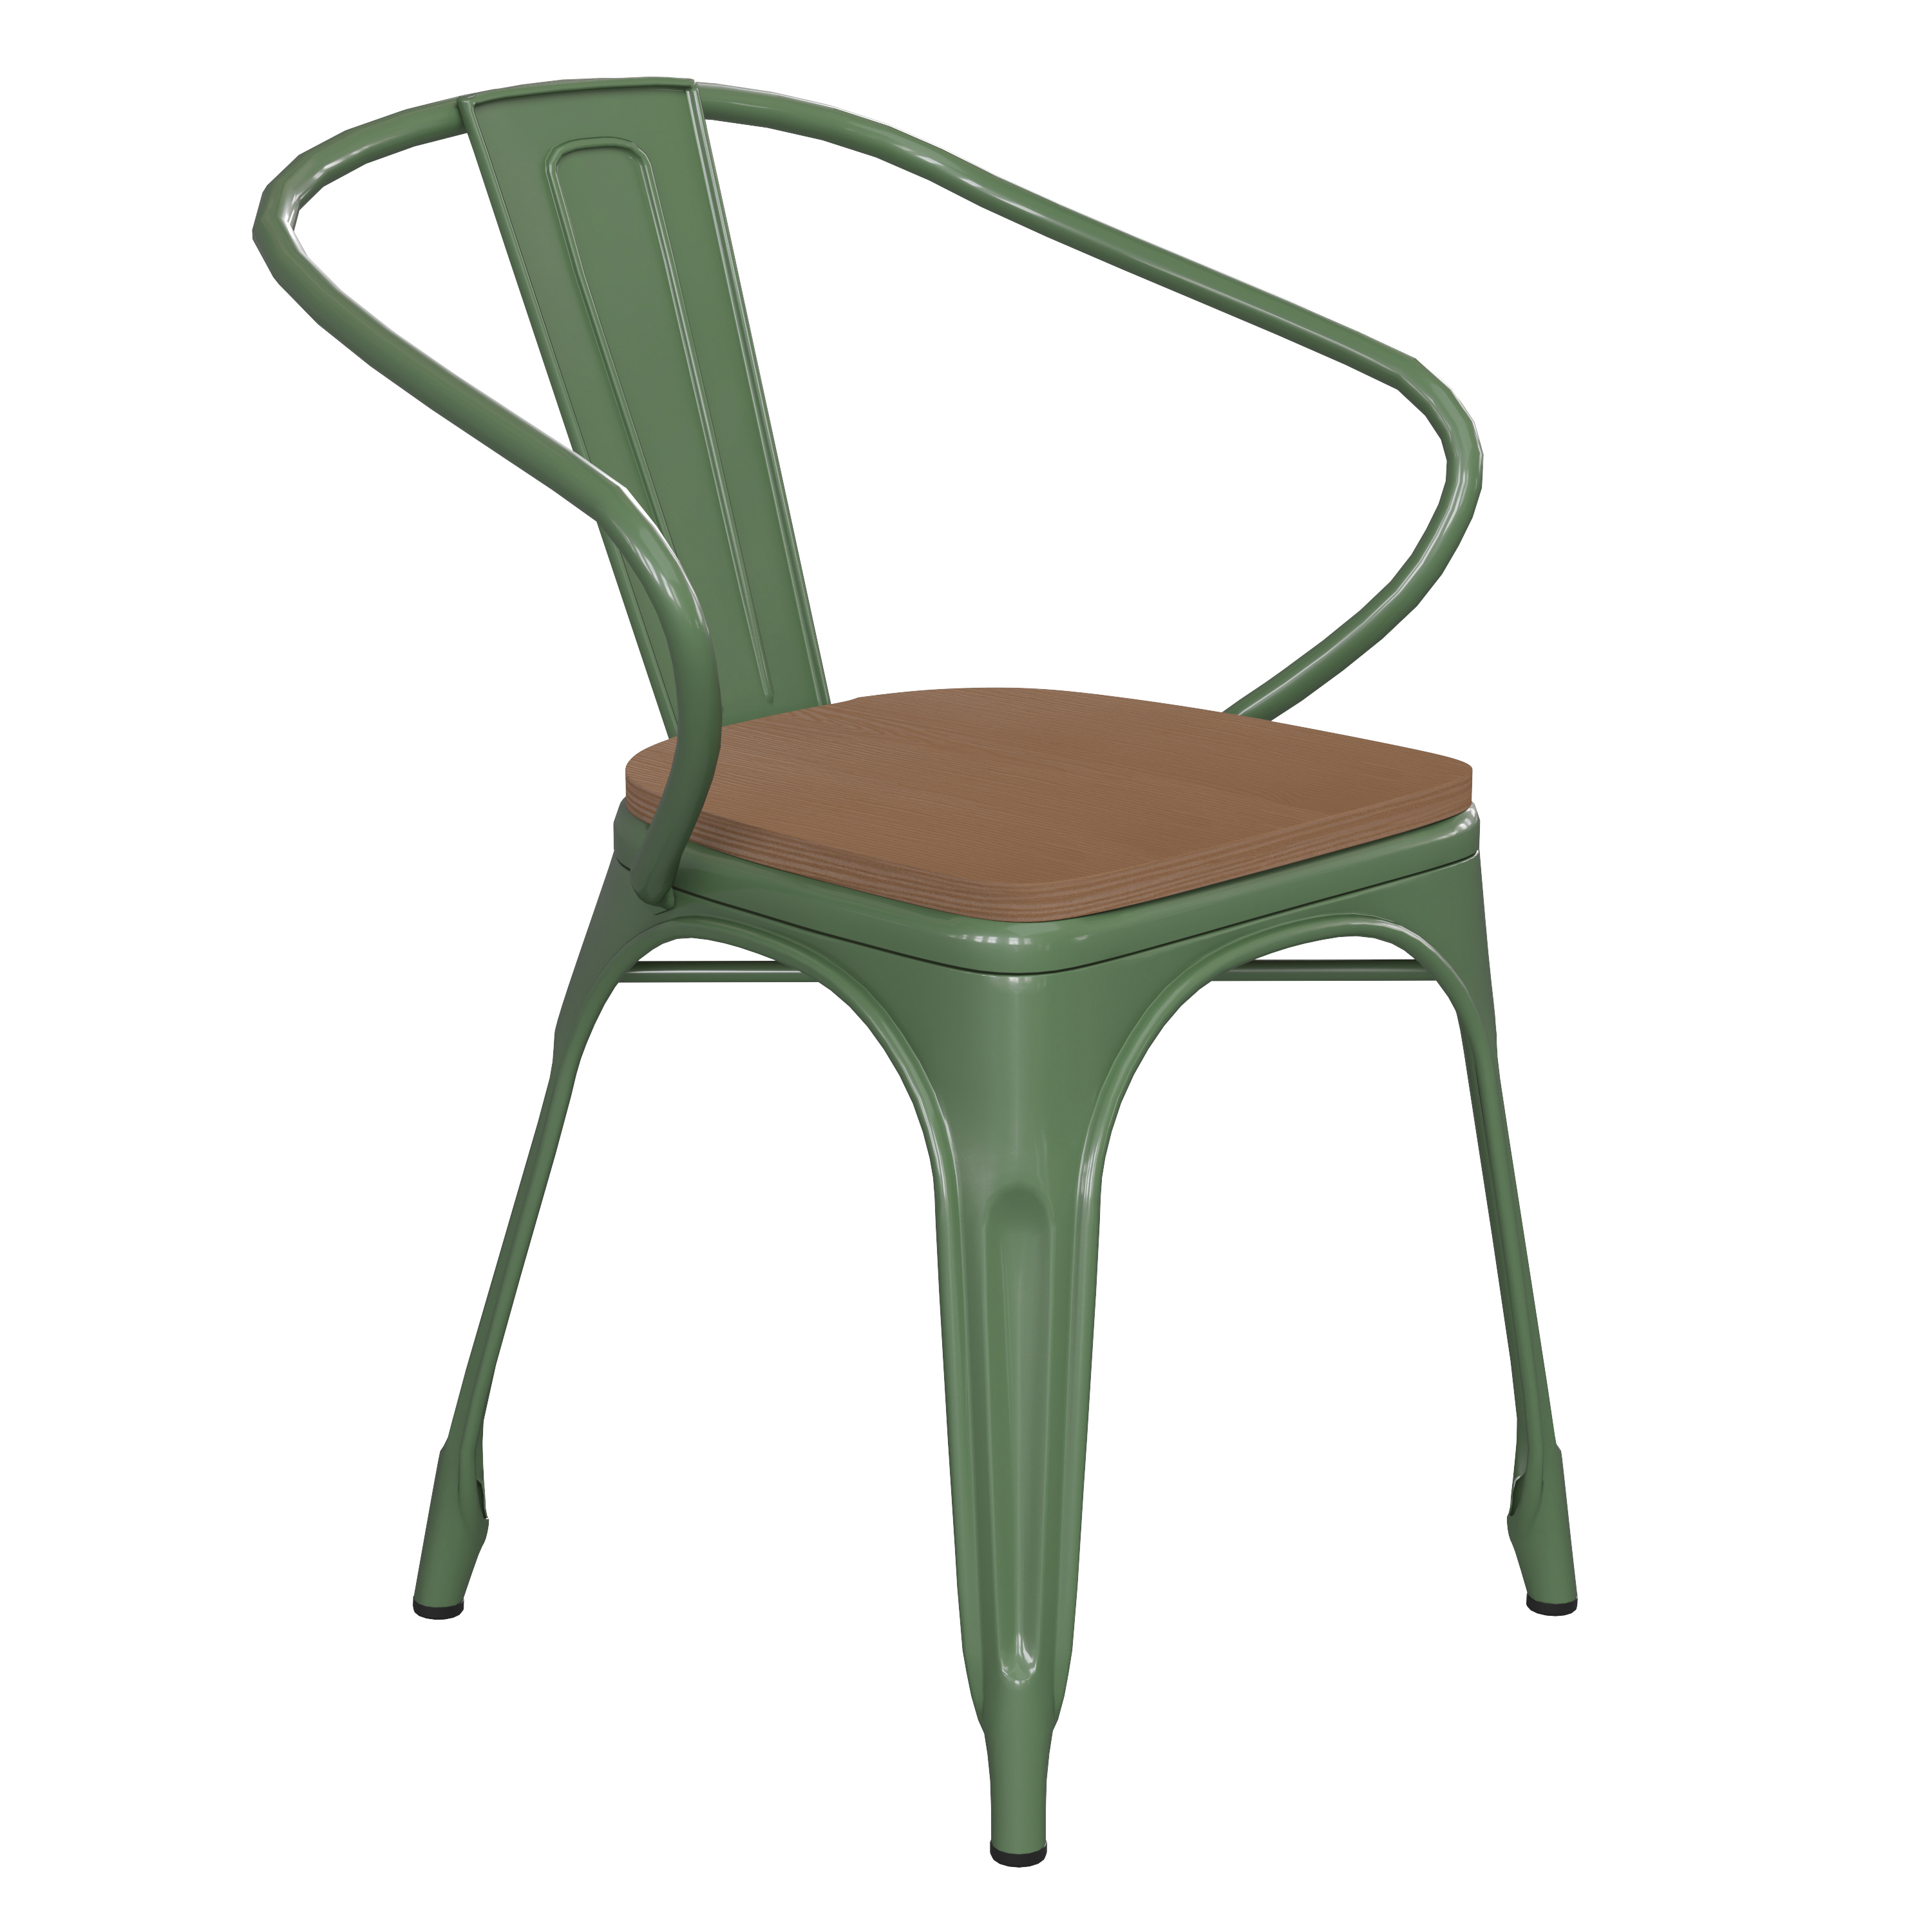 Flash Furniture CH-31270-GN-PL1T-GG Green Metal Indoor/Outdoor Chair with Arms with Teak Poly Resin Wood Seat